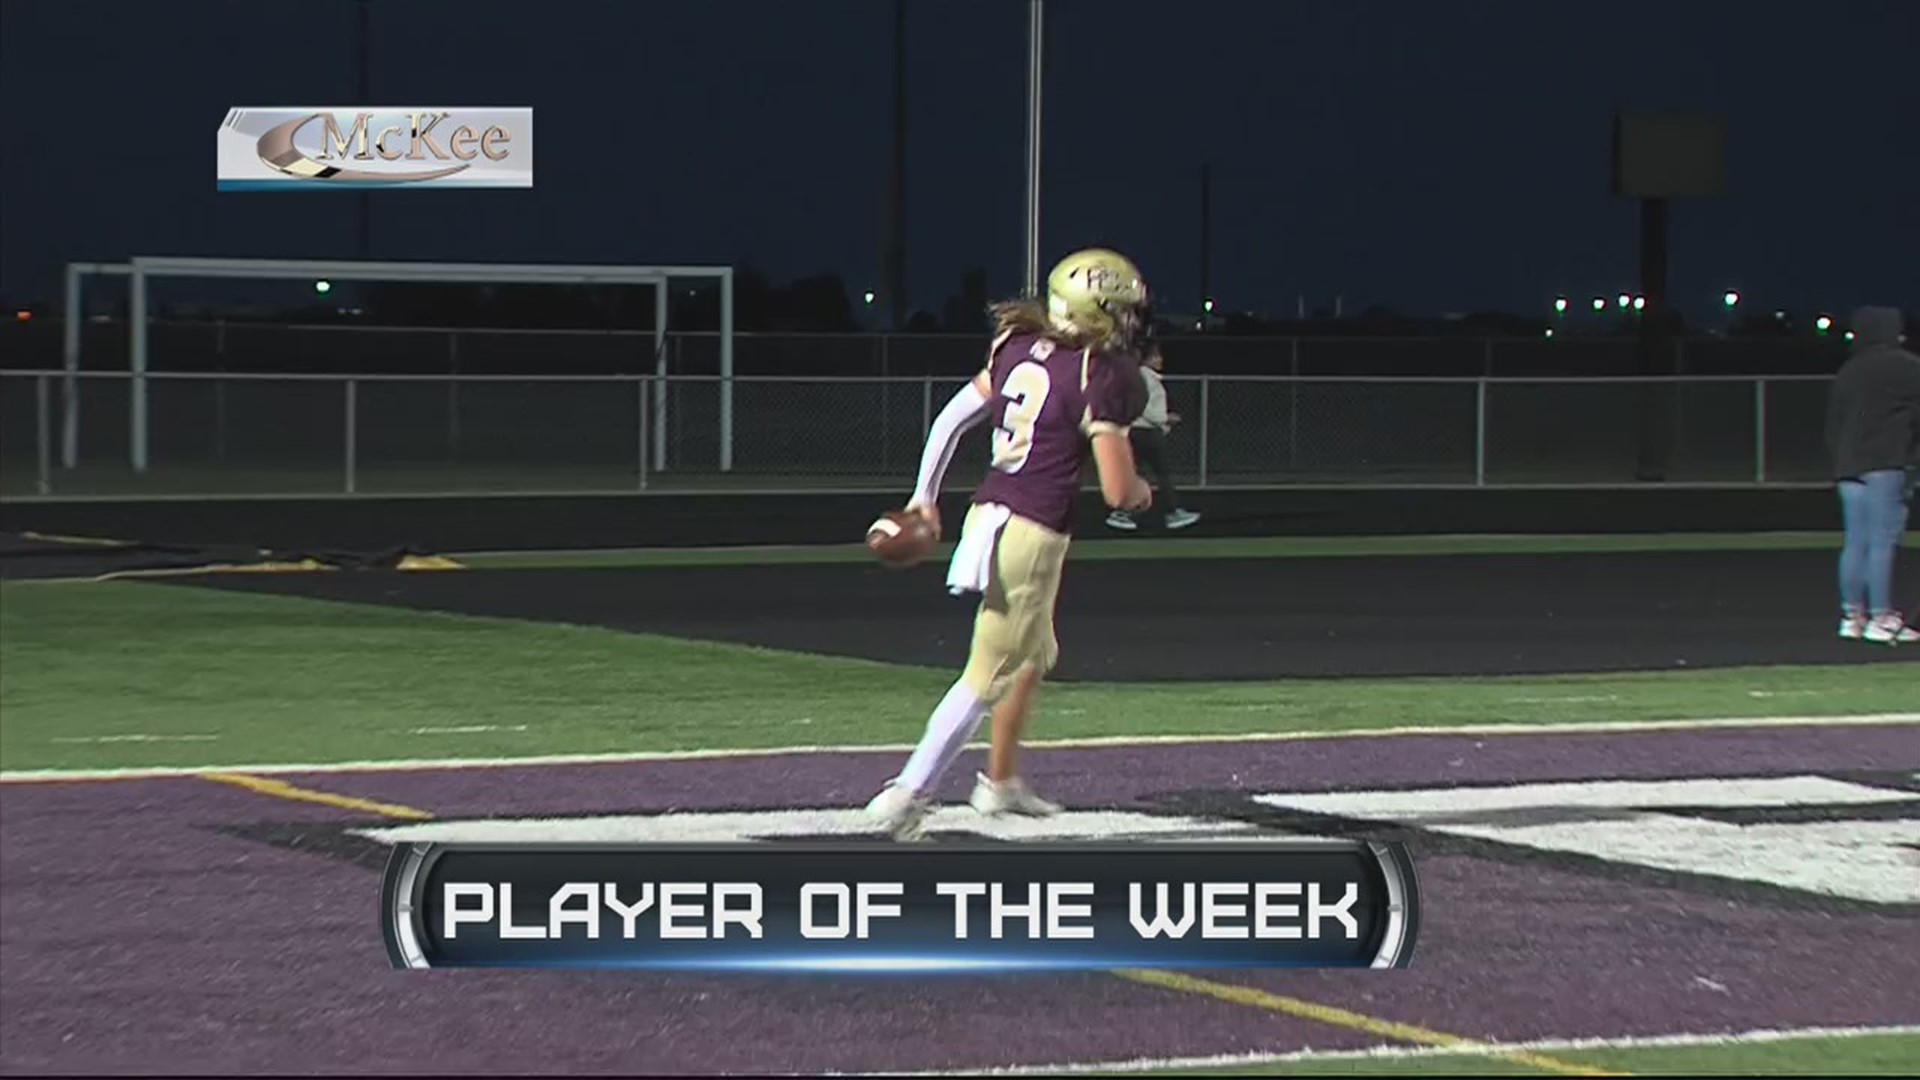 McKee RV & Auto Player of the Week